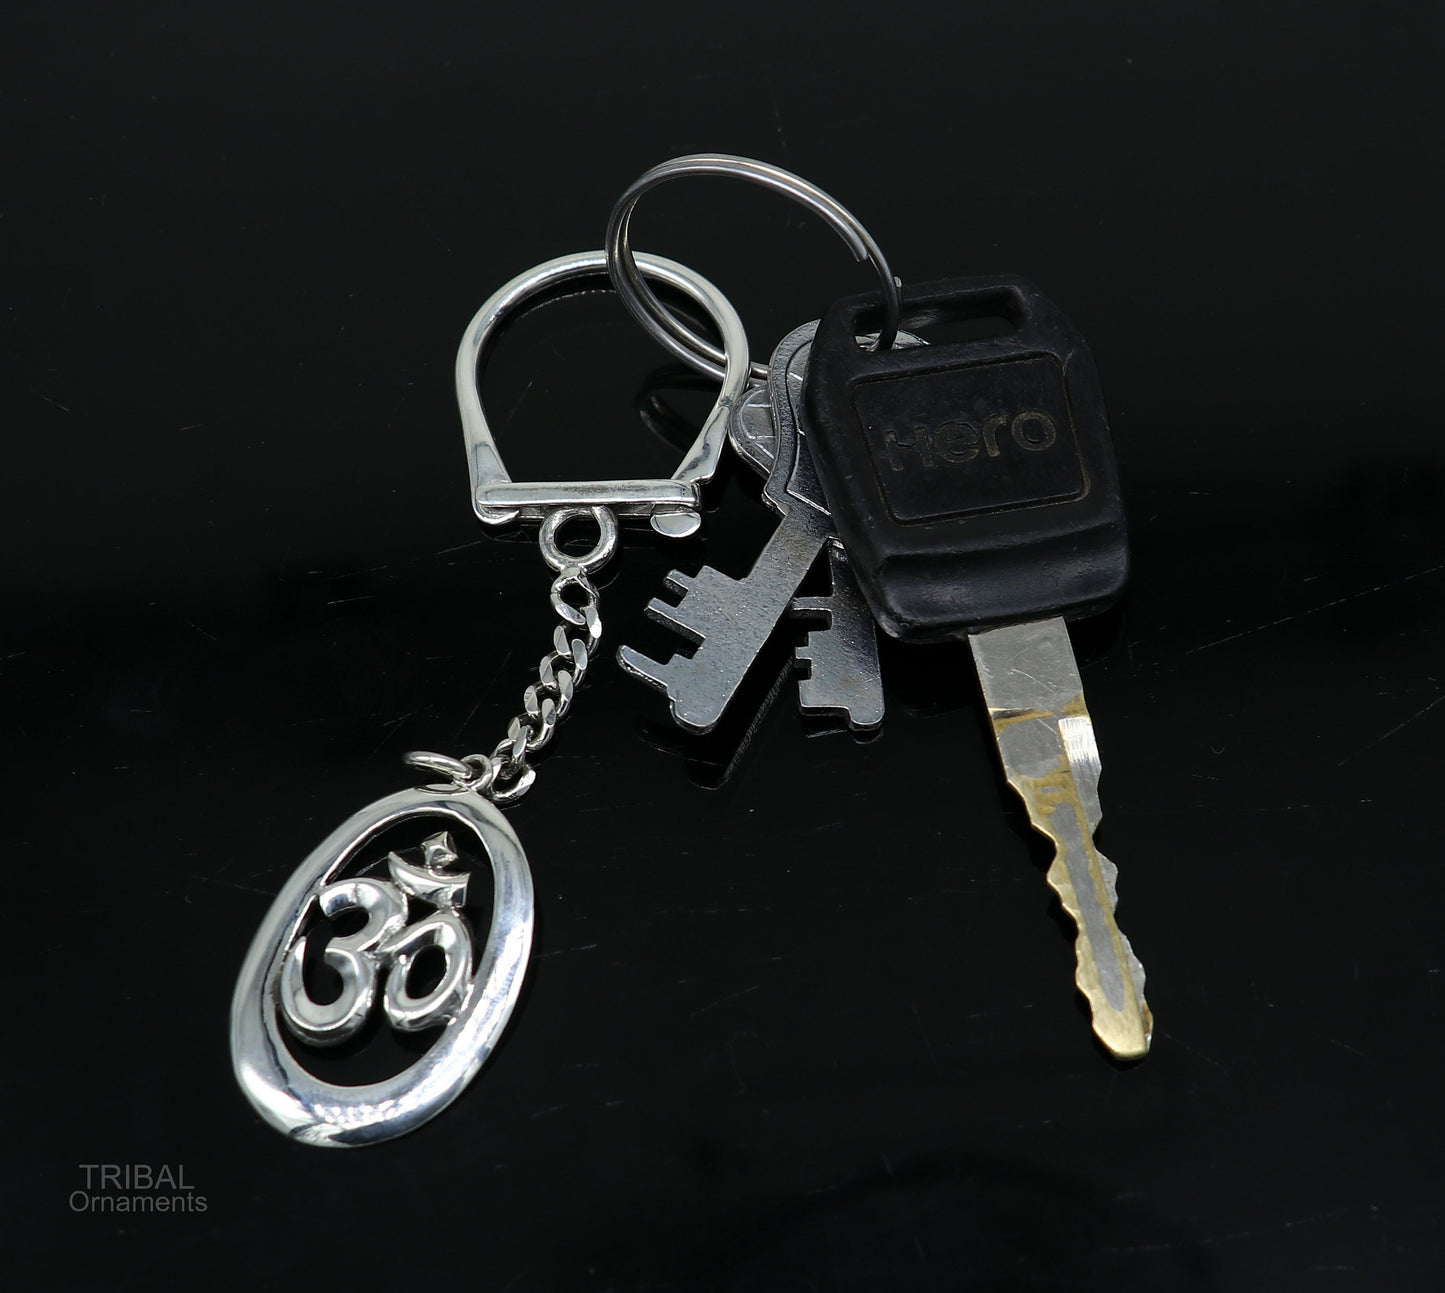 925 Sterling silver handmade unique style OM "aum" mantra solid key chian, stylish royal gifting silver accessories unisex gift kch08 - TRIBAL ORNAMENTS